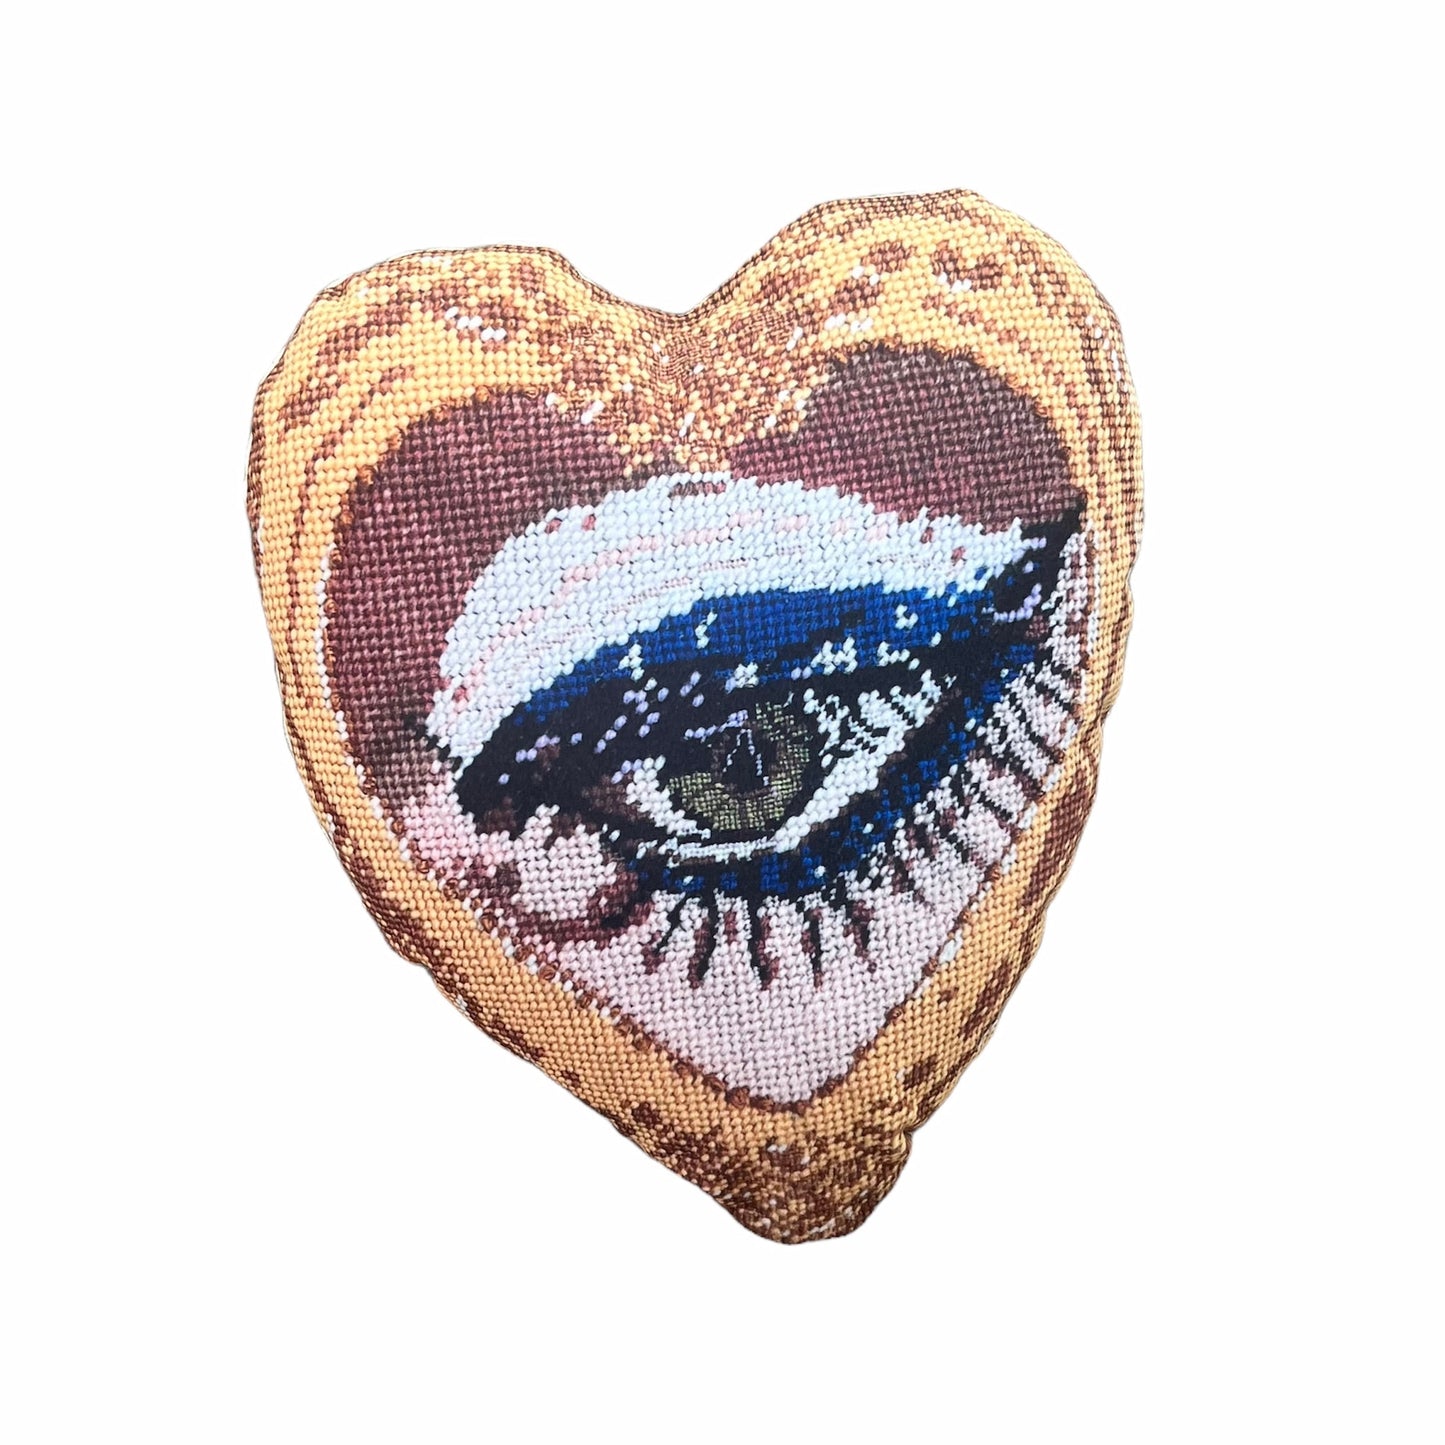 Mommani Threads x Haricot Vert "Heartfelt Glimpse" pillow is shaped like a heart and features a sultry green eye inside a gold frame.